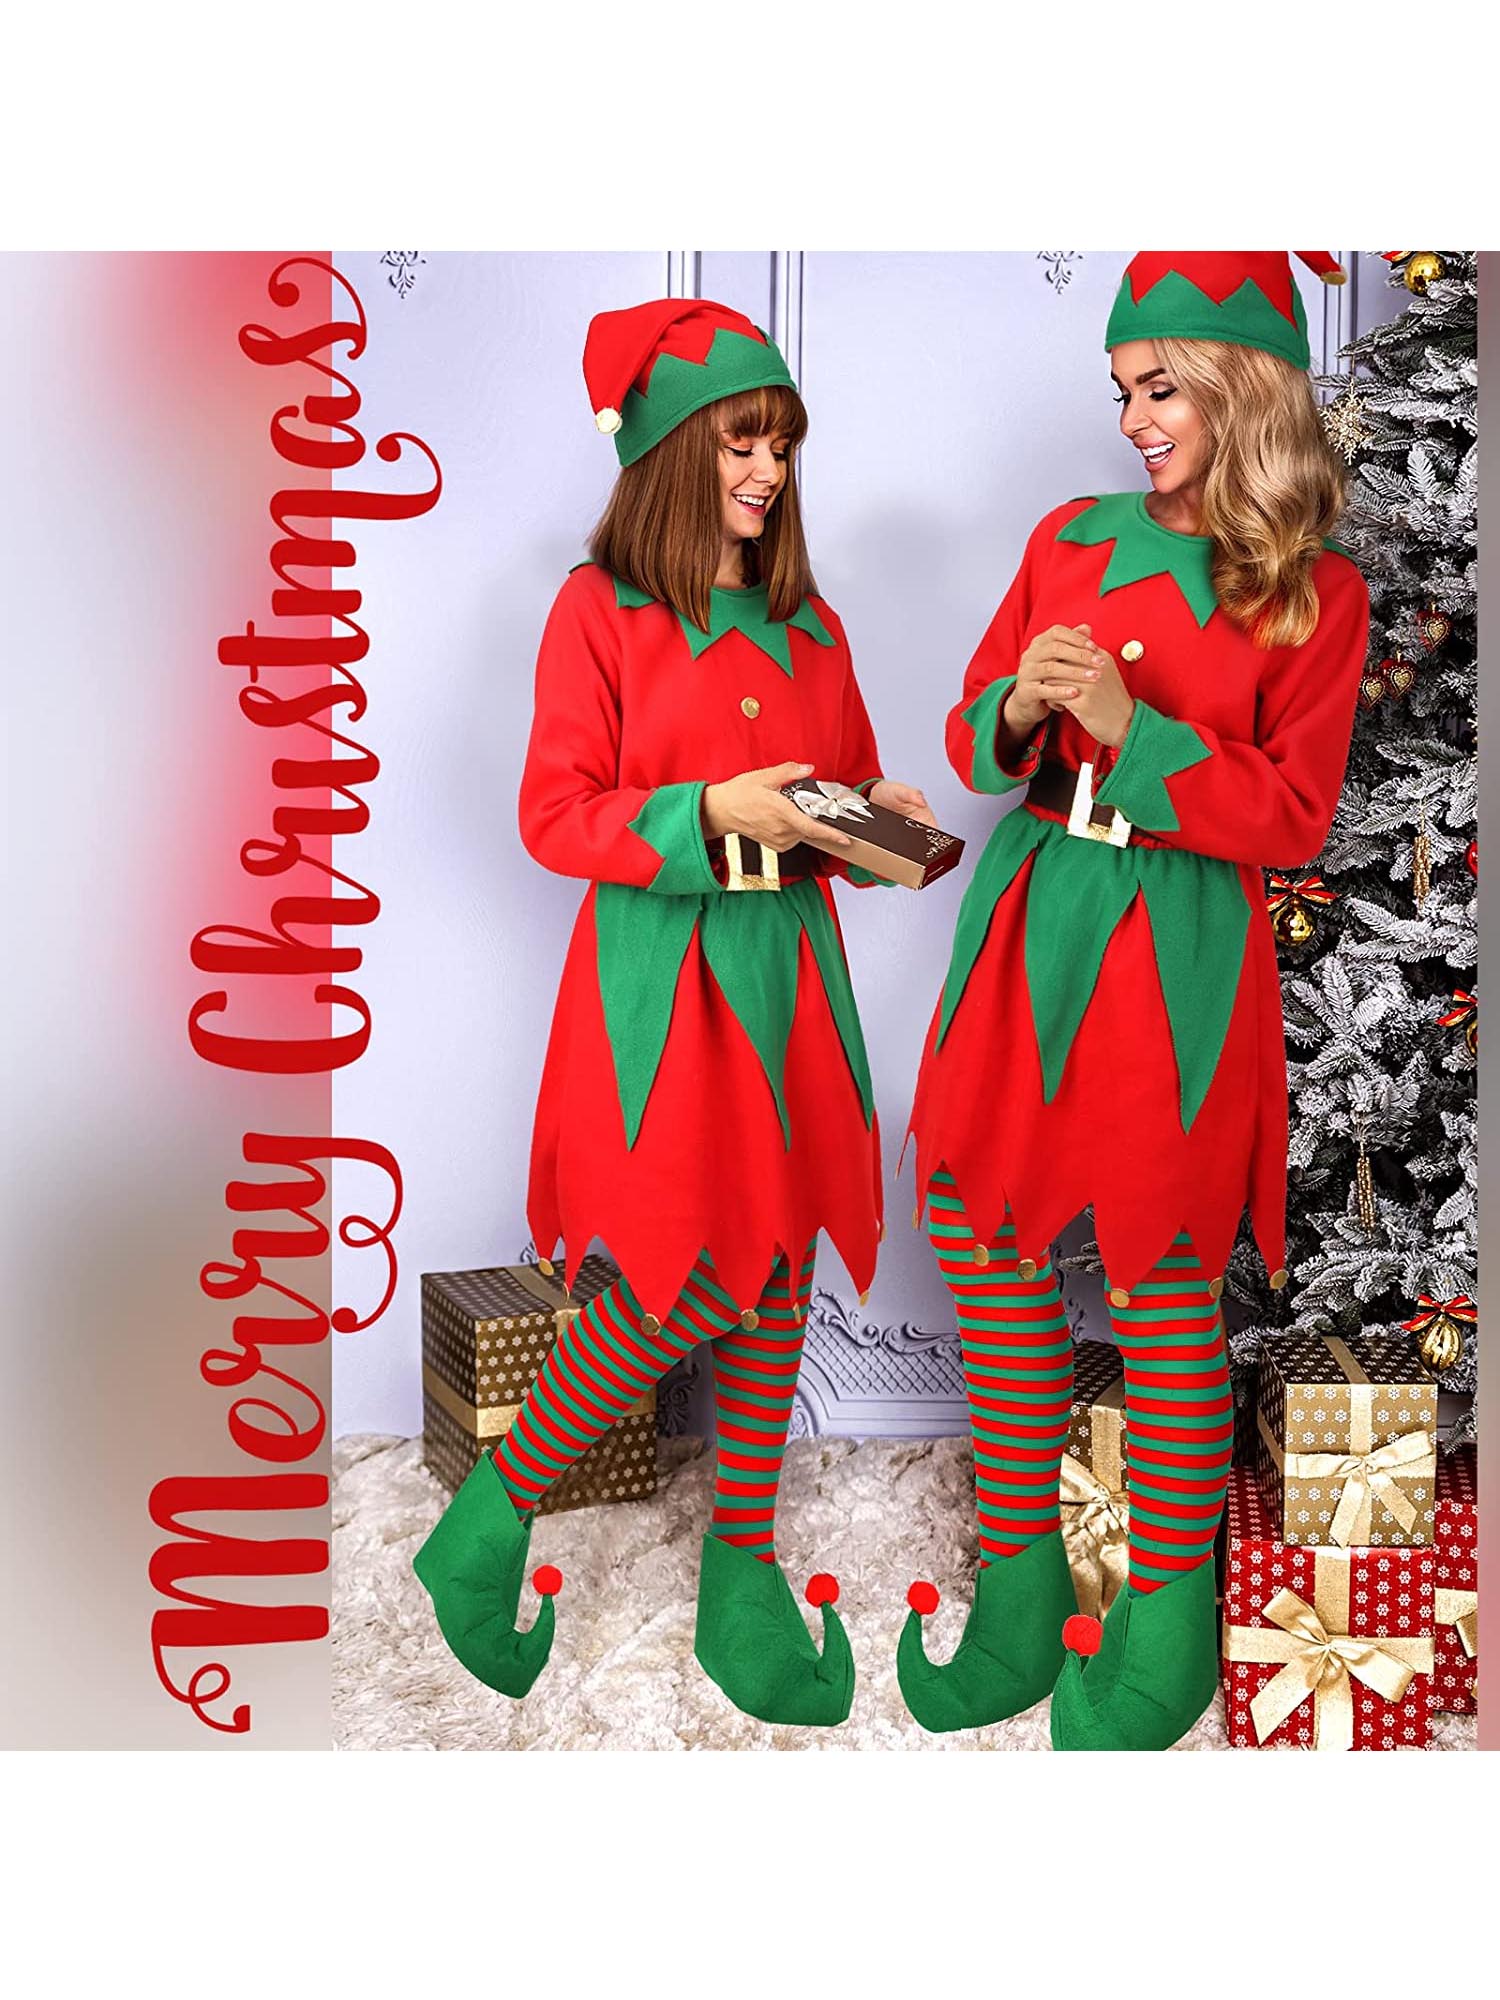 Christmas Cosplay Costume for Women Girl Elf Dress With Belt Hat Shoes Gift New Year Carnival Party Costume - image 2 of 5